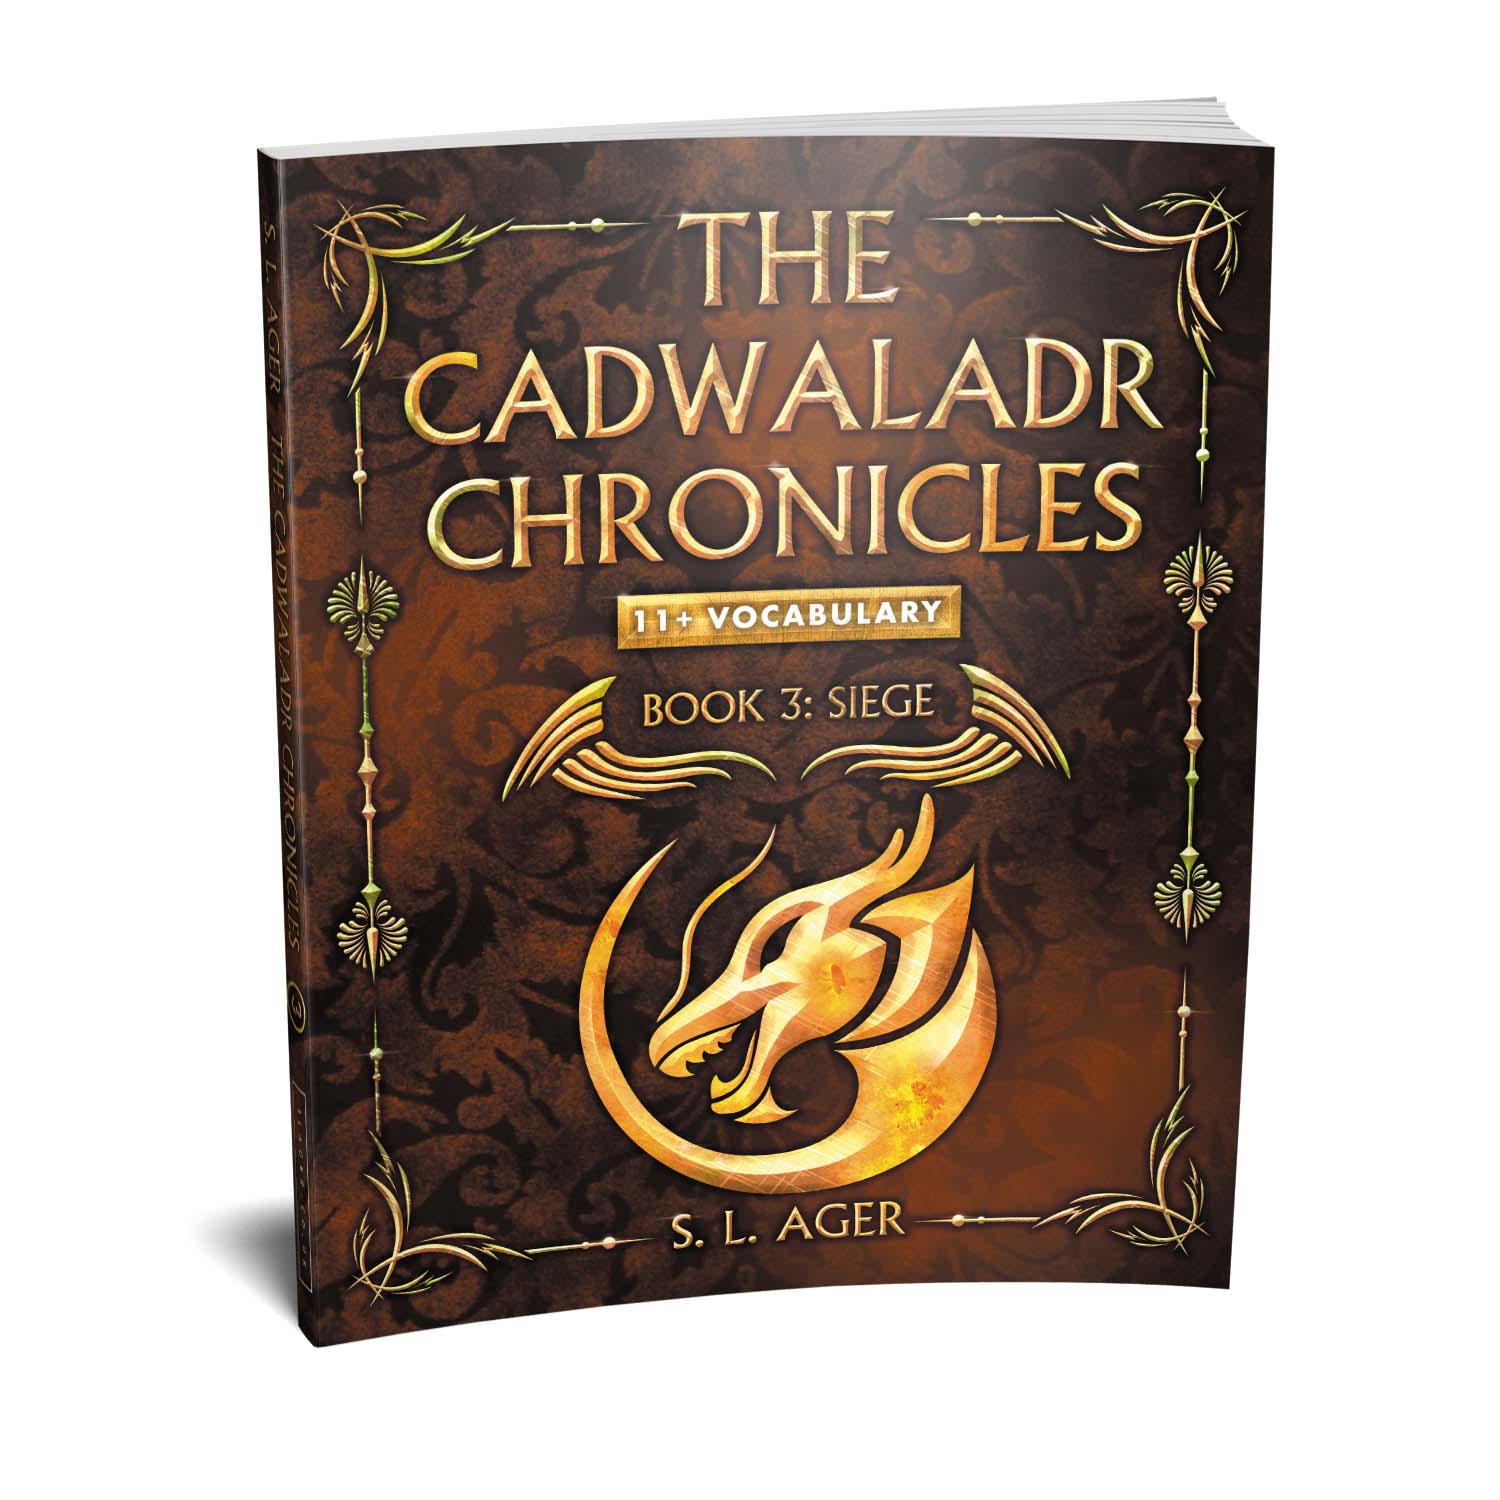 'The Cadwaladr Chronicles' is unique, story-based, educational novel series that teaches young readers nearly 3000 exam-level English words. The author is S L Ager. The book cover and interior design are by Mark Thomas. To learn more about what Mark could do for your book, please visit coverness.com.